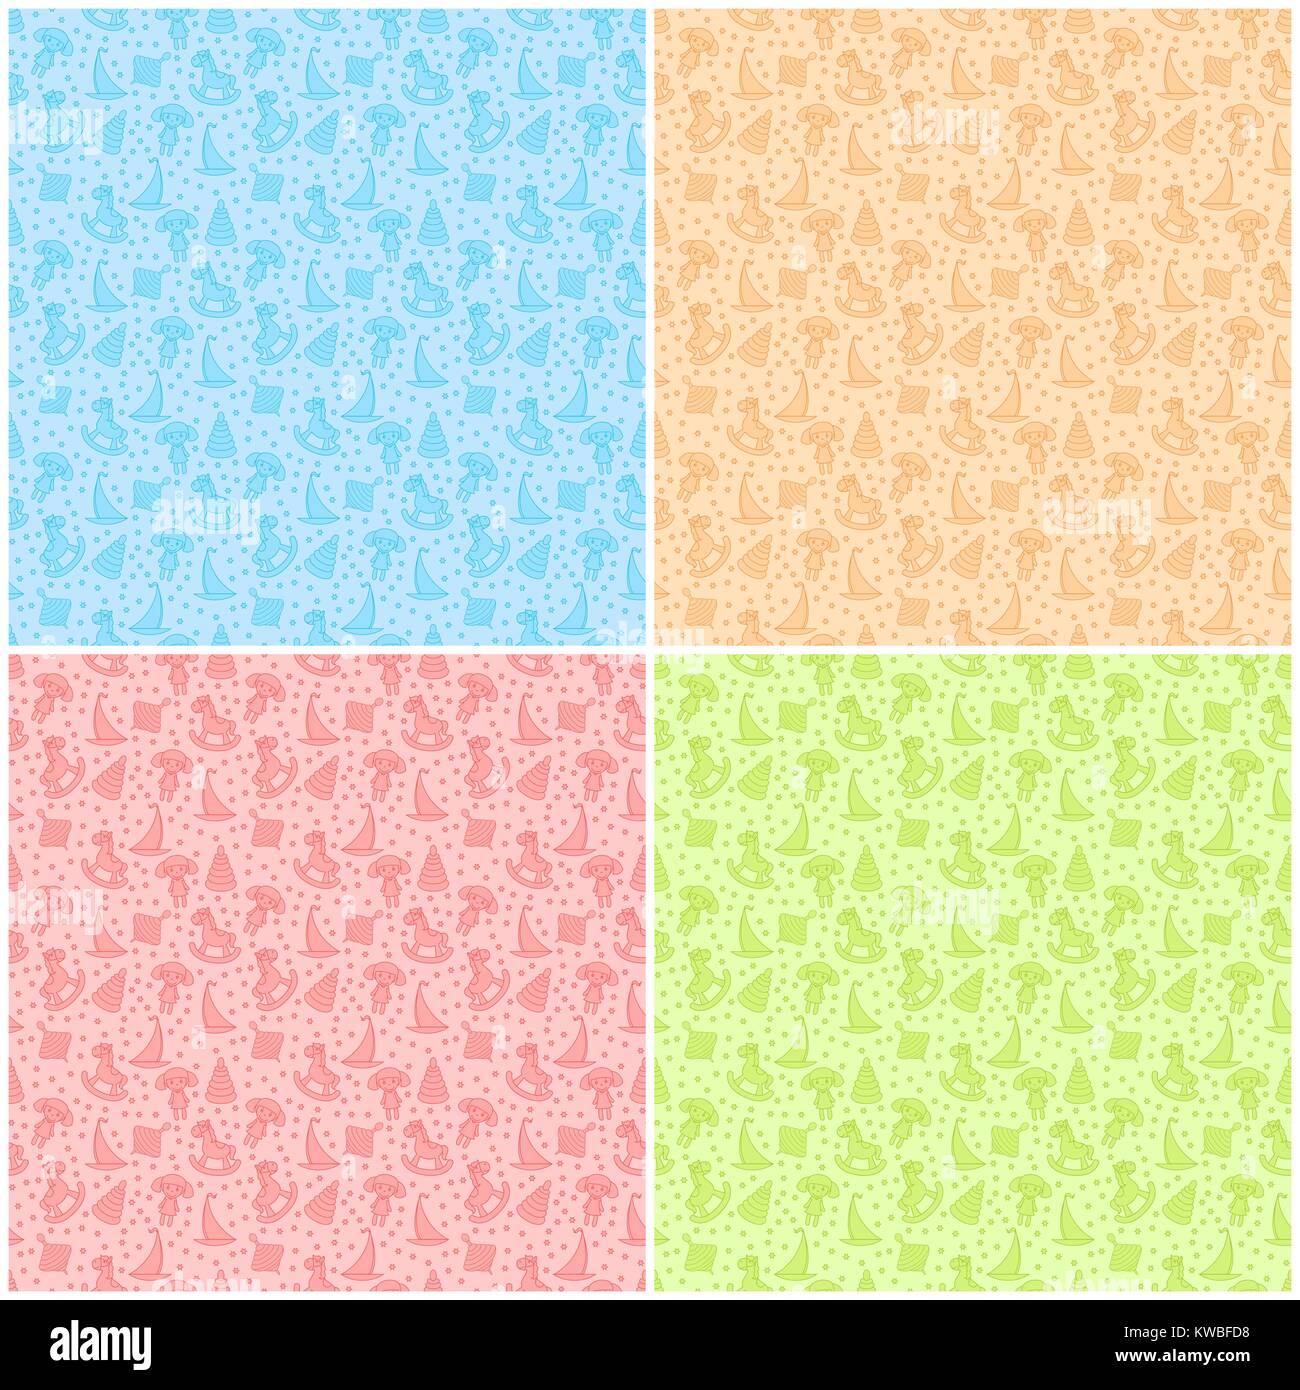 Set of four cartoon seamless vector patterns with toys of Horse, Sailboat, Whirligig and Dolls in blue, beige, pink and green colors a fabric or other Stock Vector